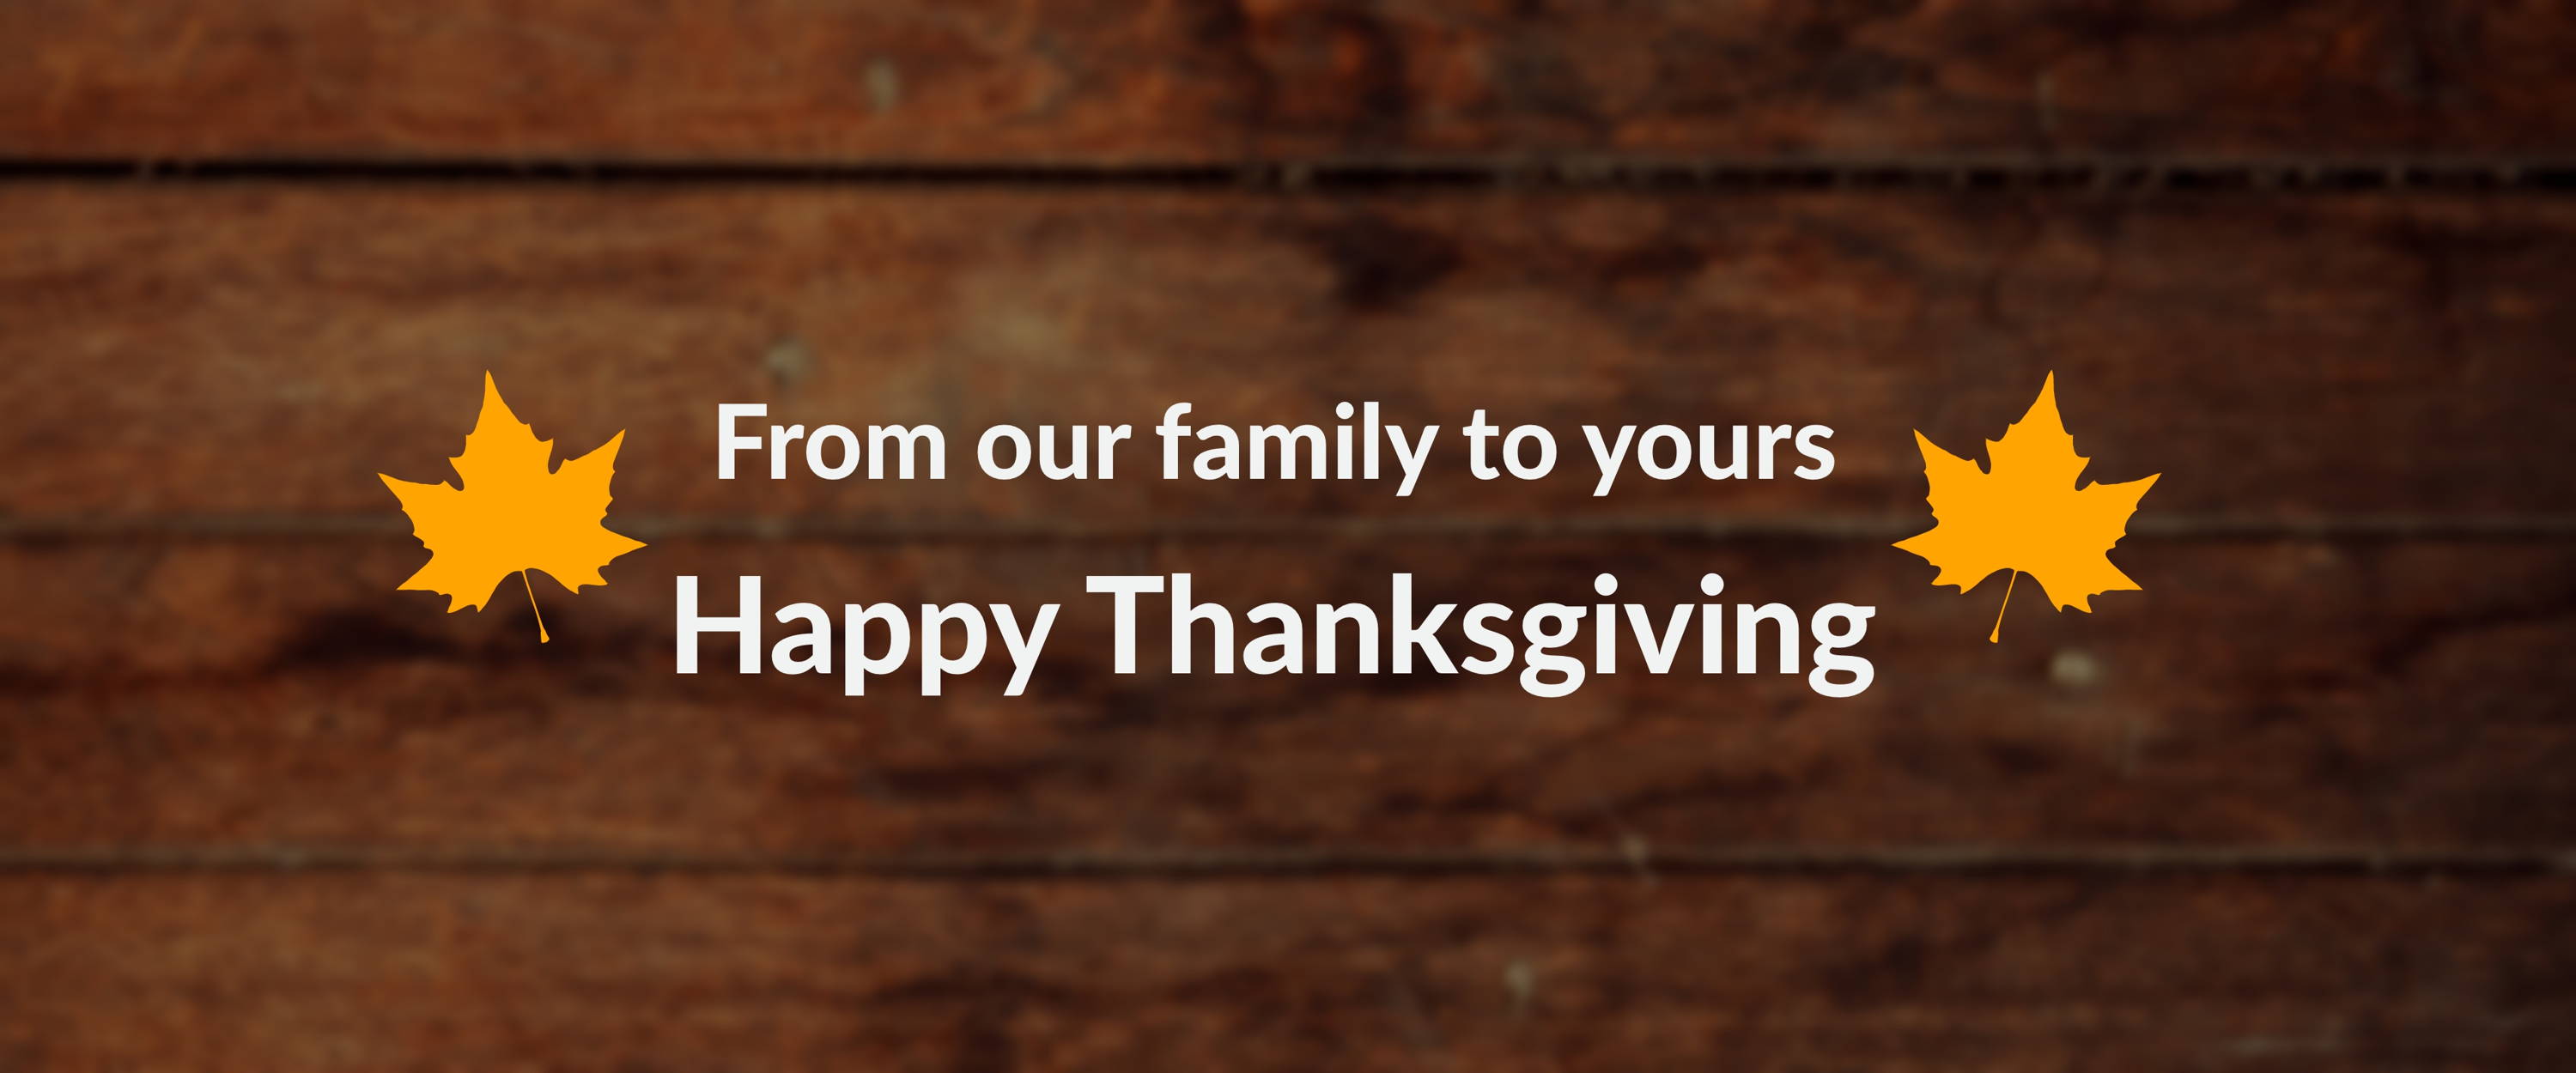 From our family to yours. Happy Thanksgiving.